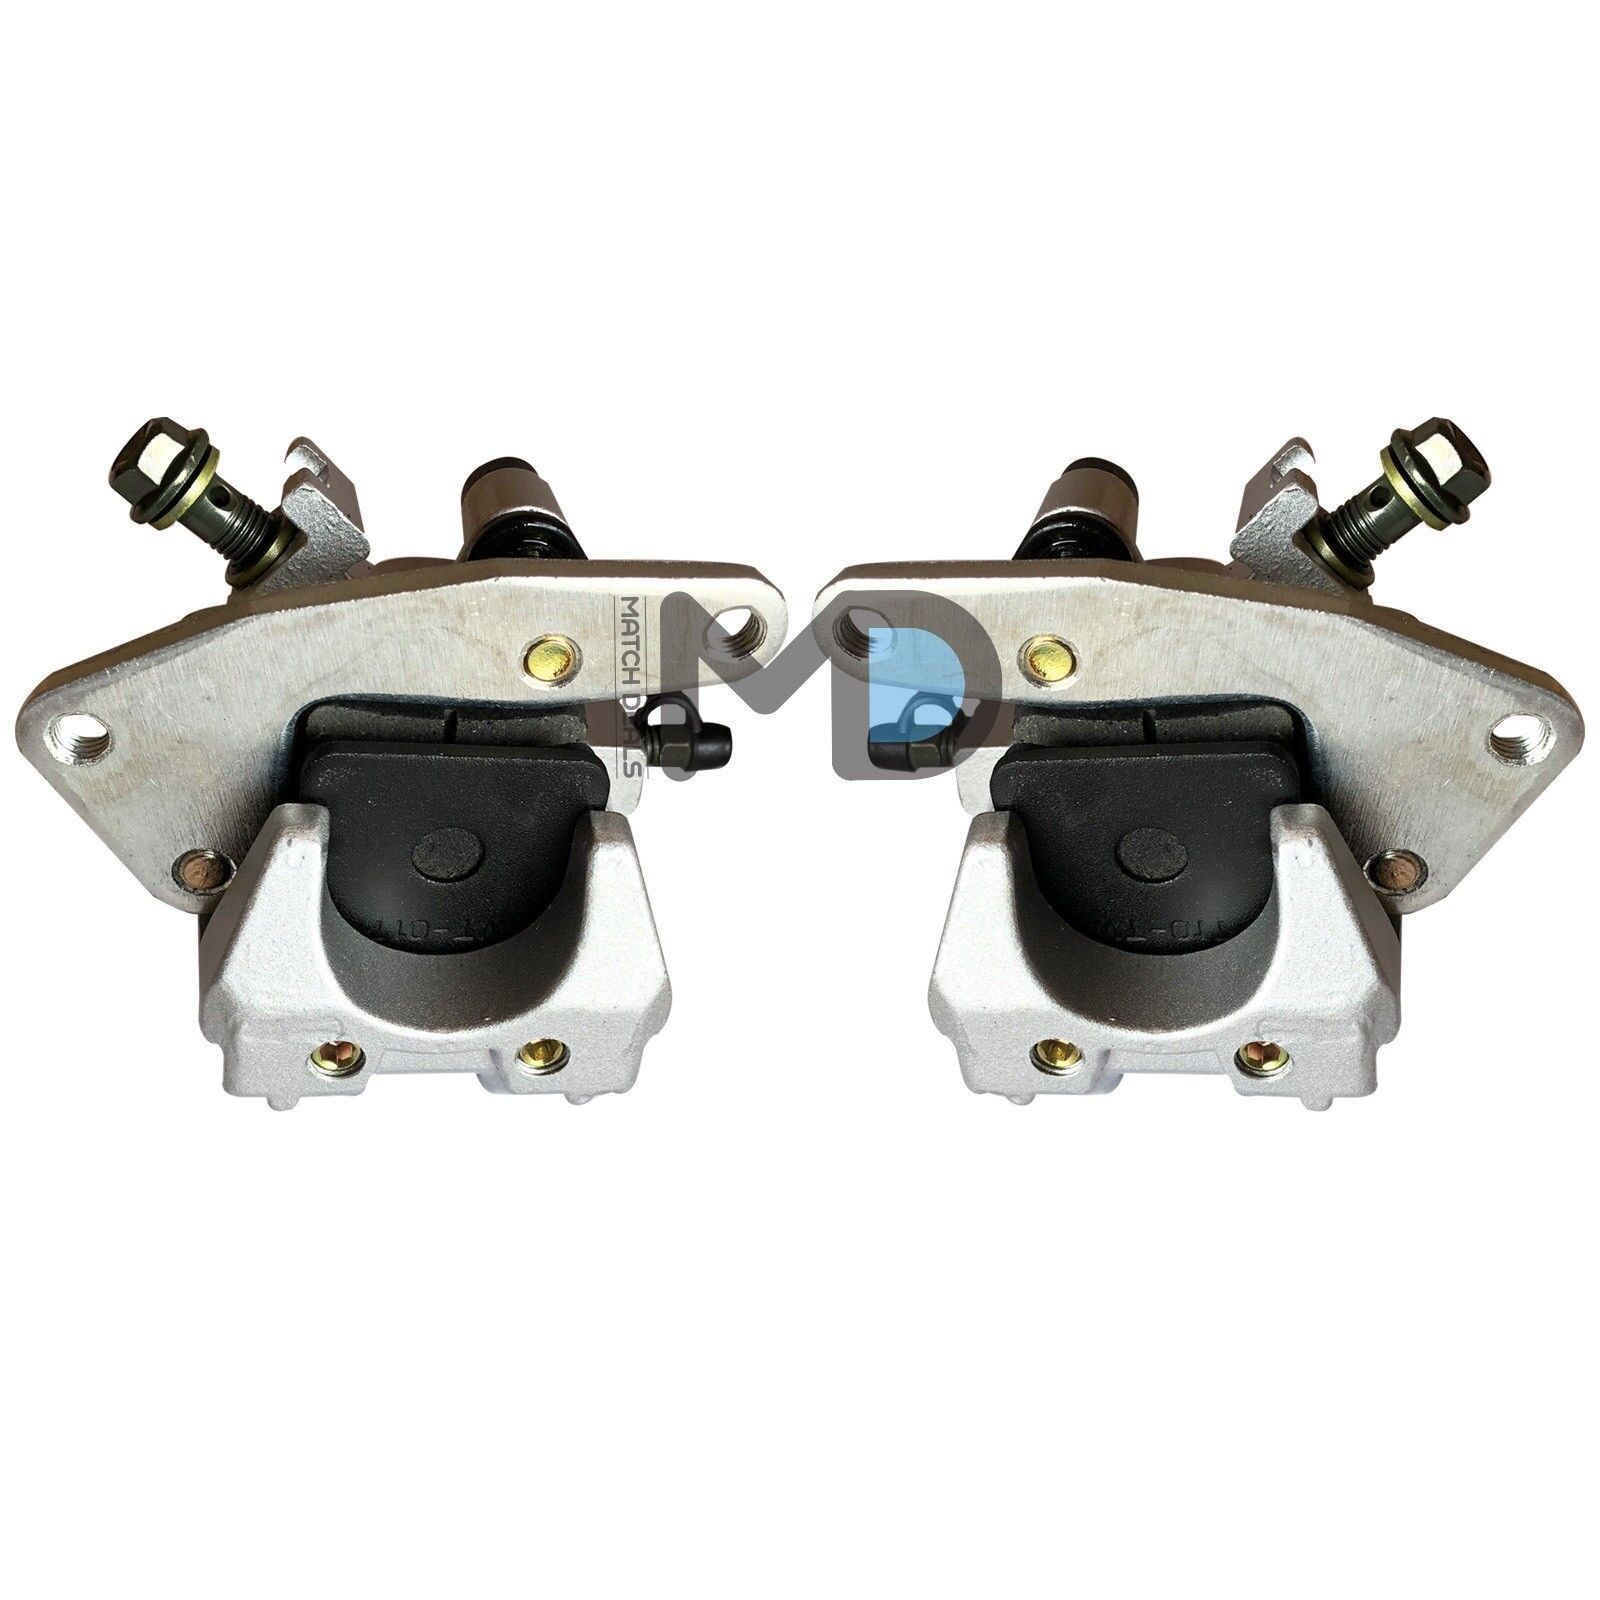 Sale FRONT BRAKE Inexpensive CALIPERS FOR YAMAHA YFM660 GRIZZLY HUNTER 660 2003-2